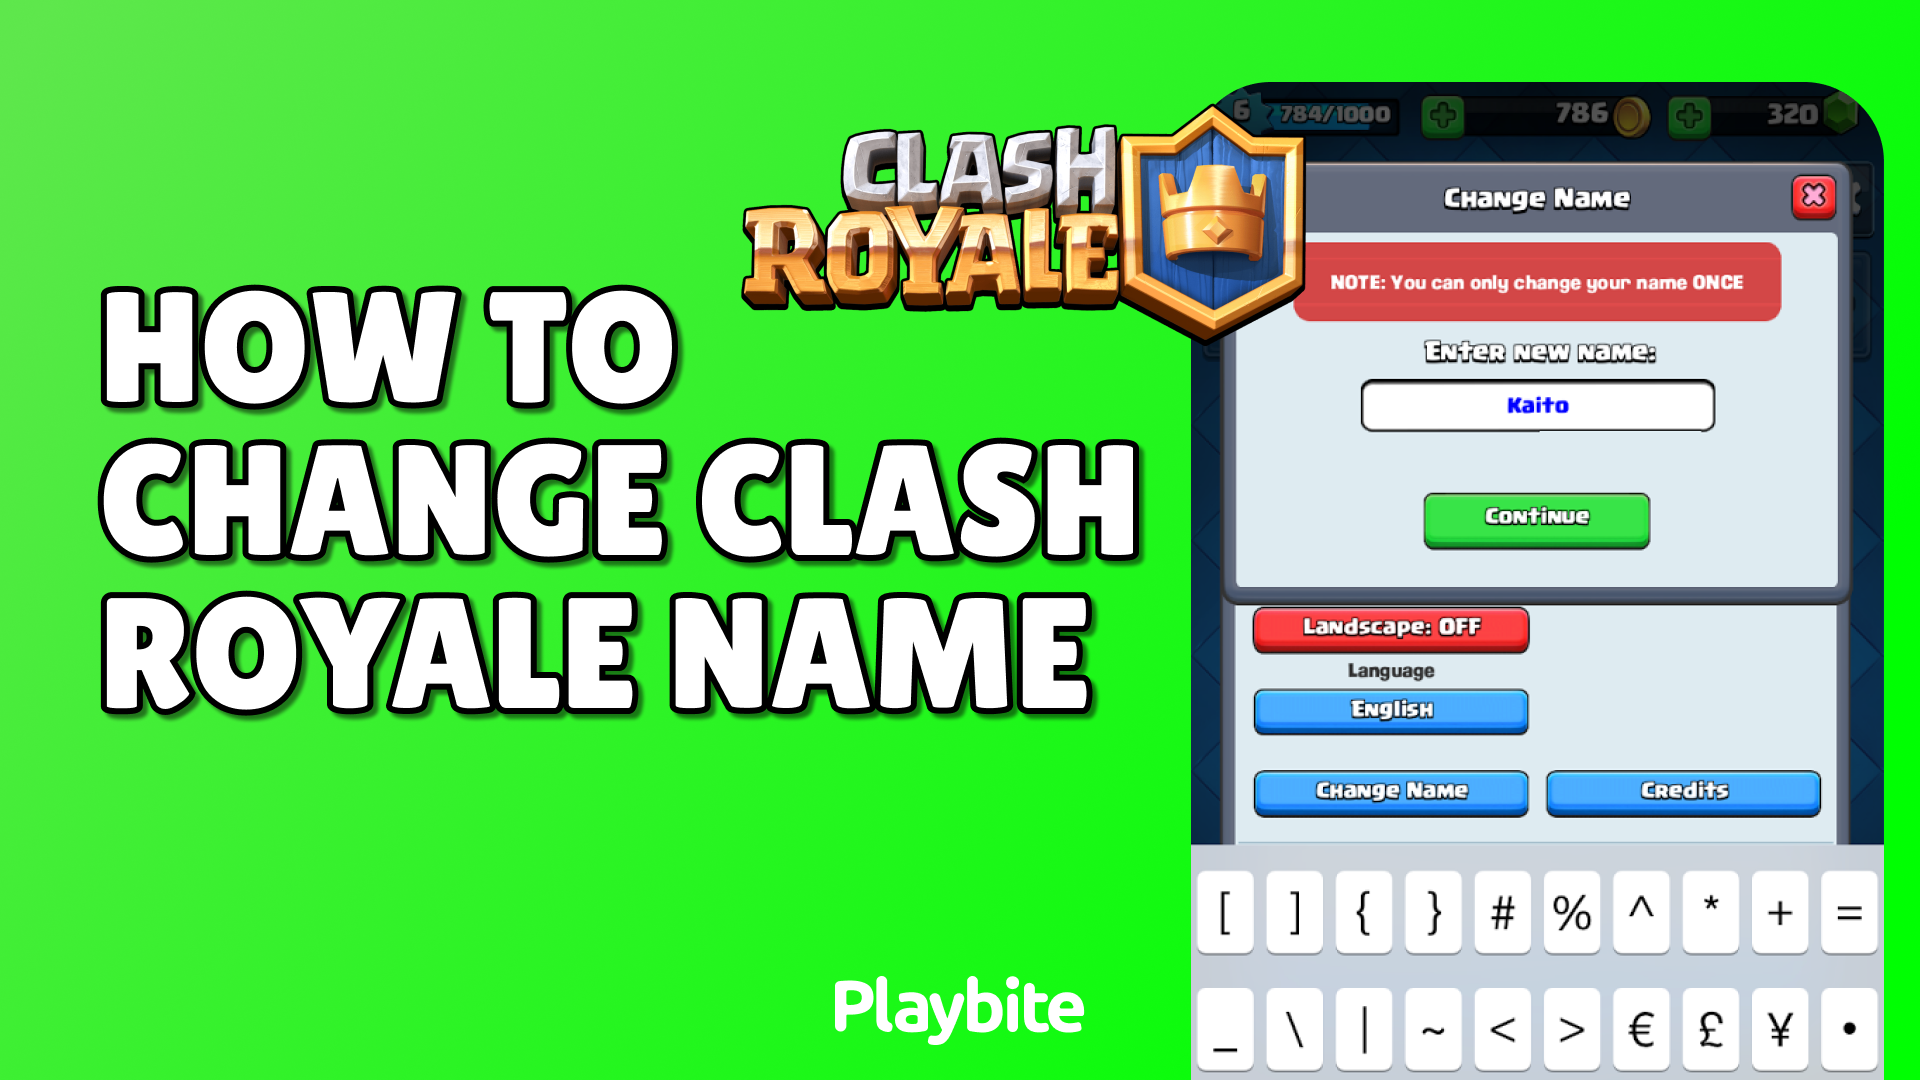 How To Change Clash Royale Name